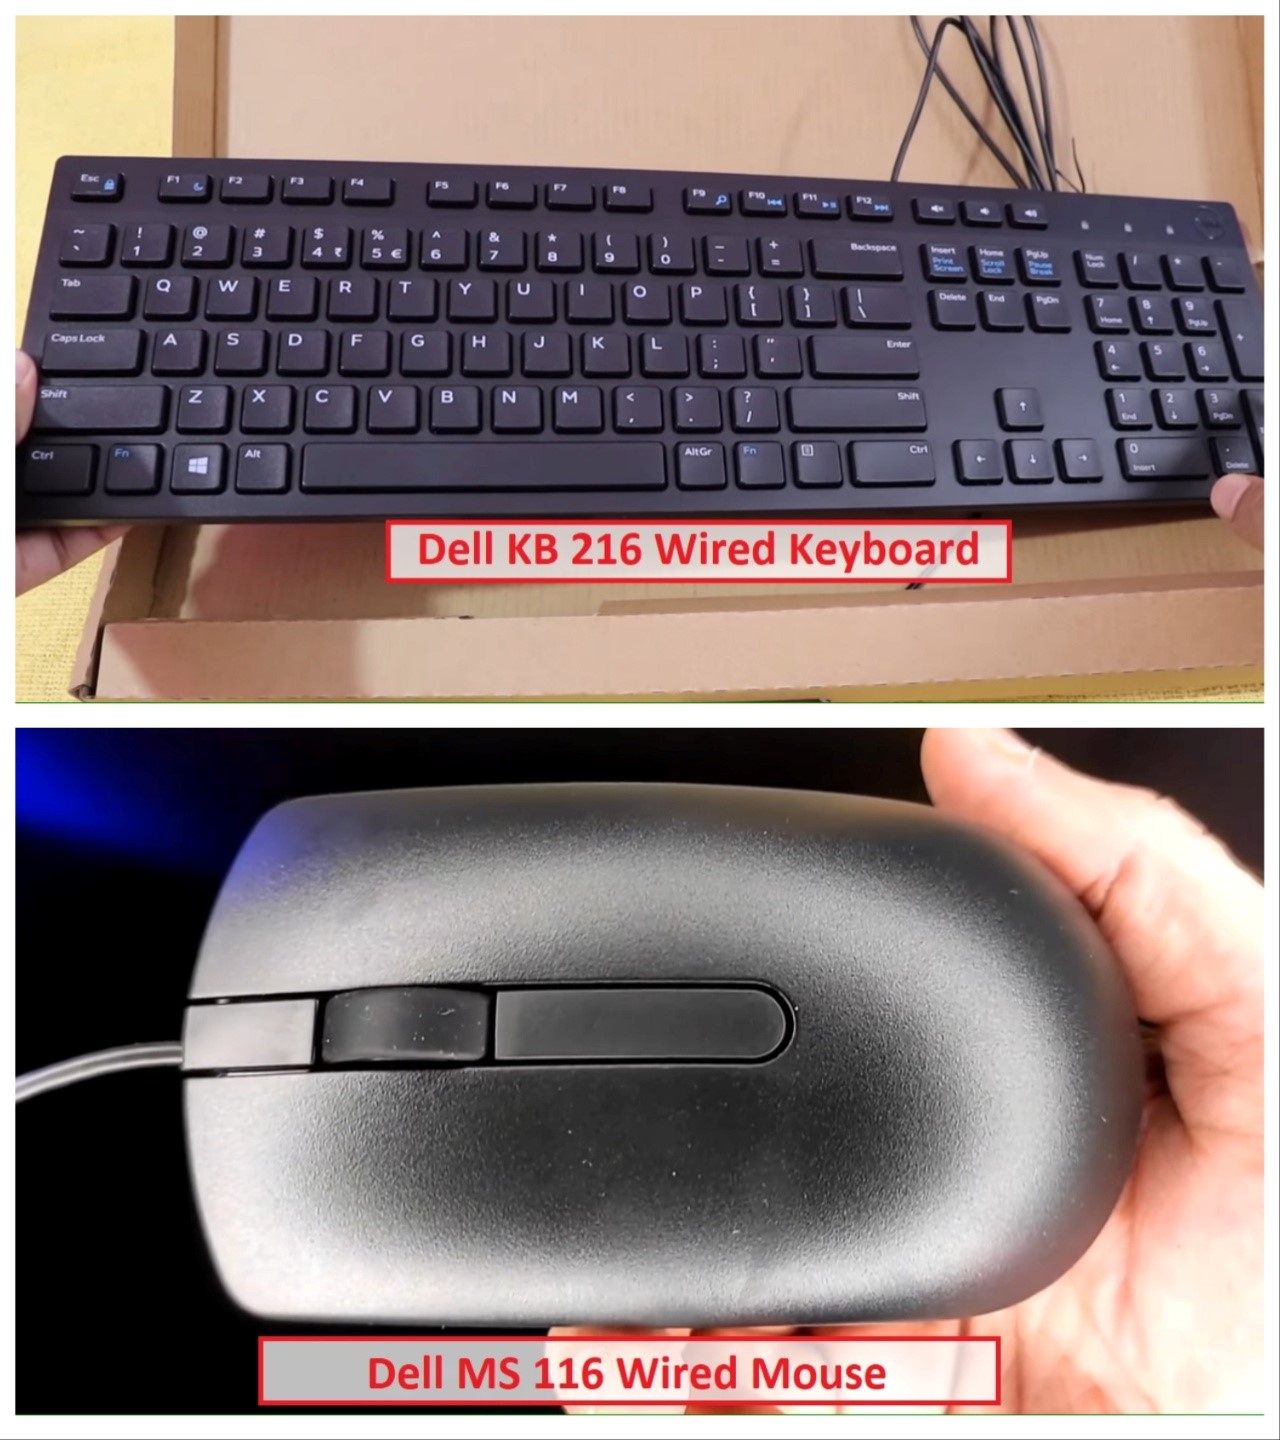 Dell OptiPlex 7050 Desktop Keyboard and mouse